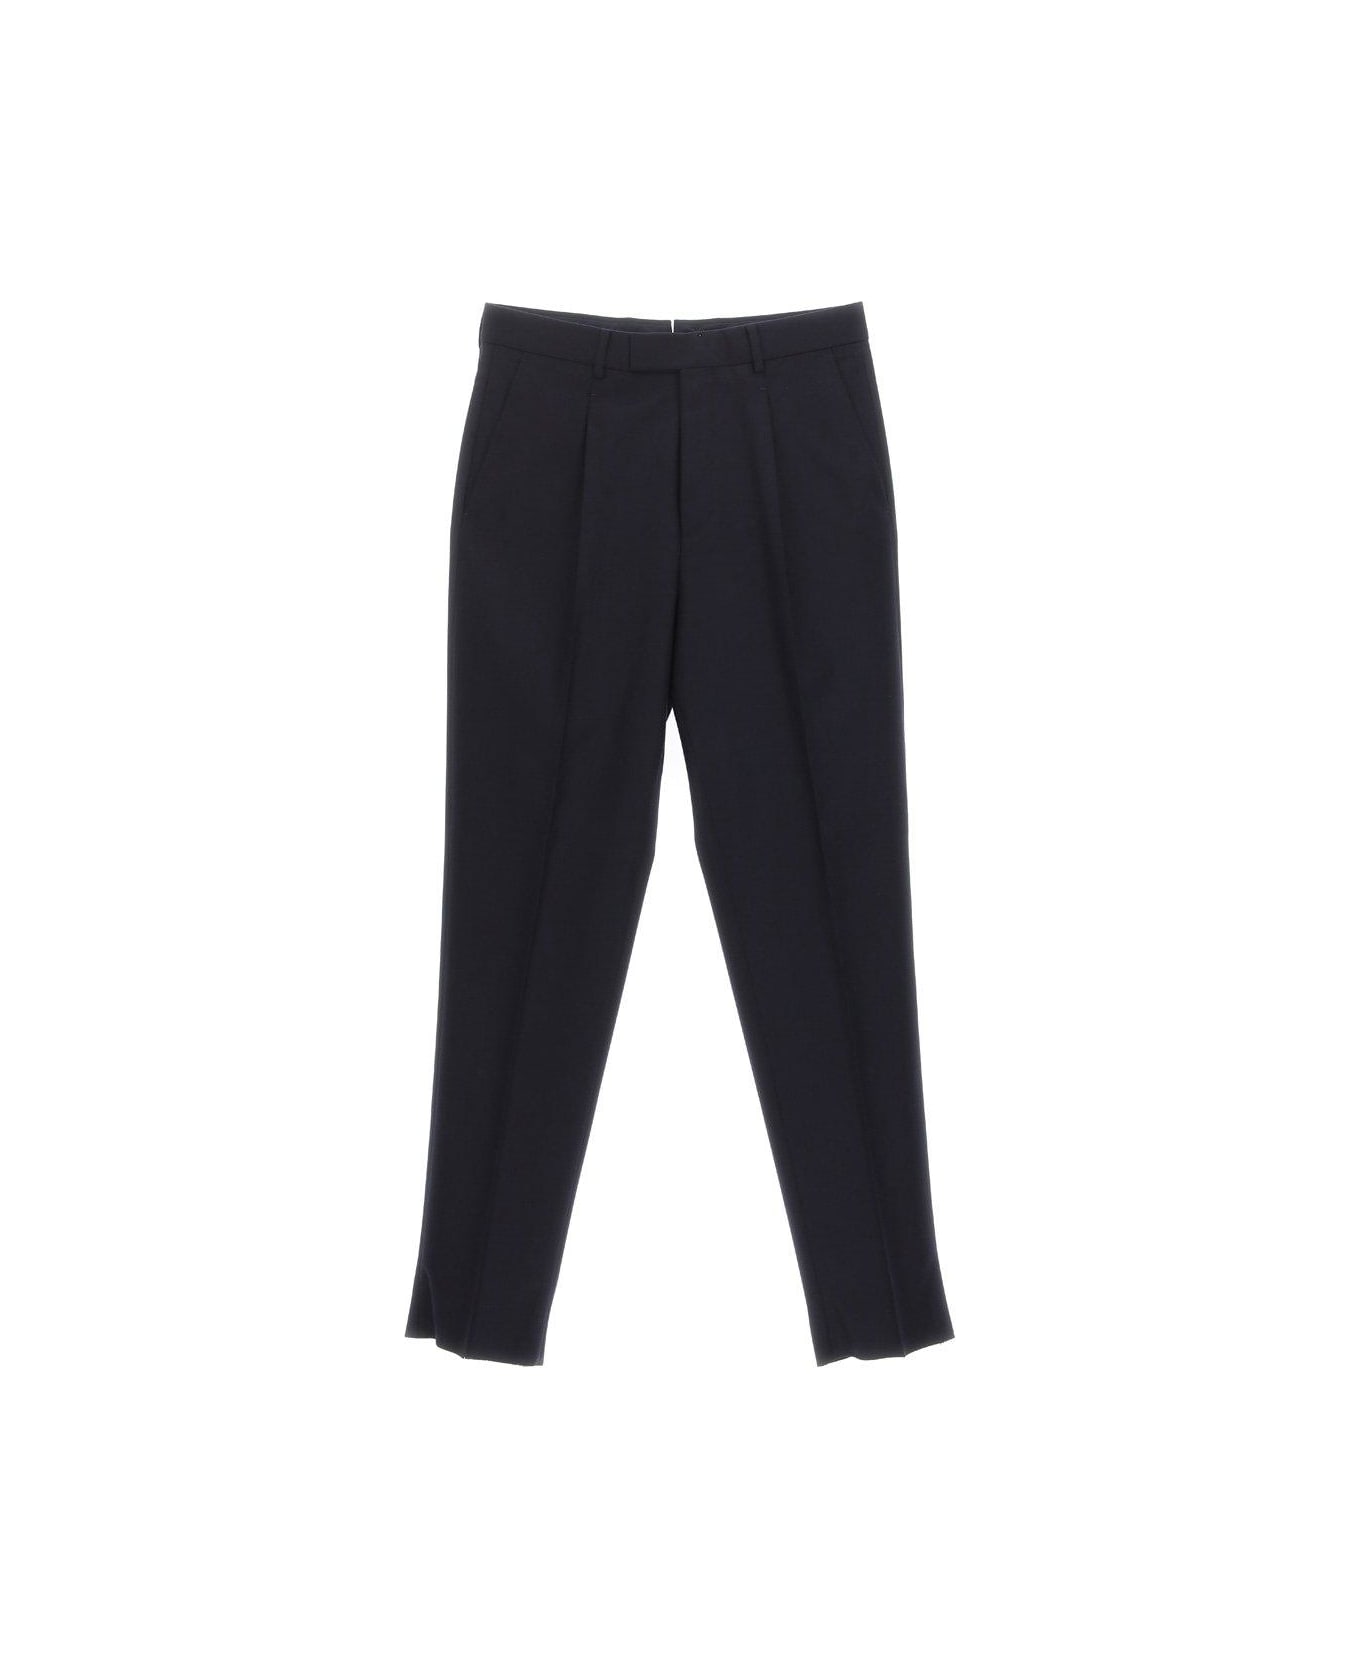 Zegna Pressed Crease Tailored Trousers